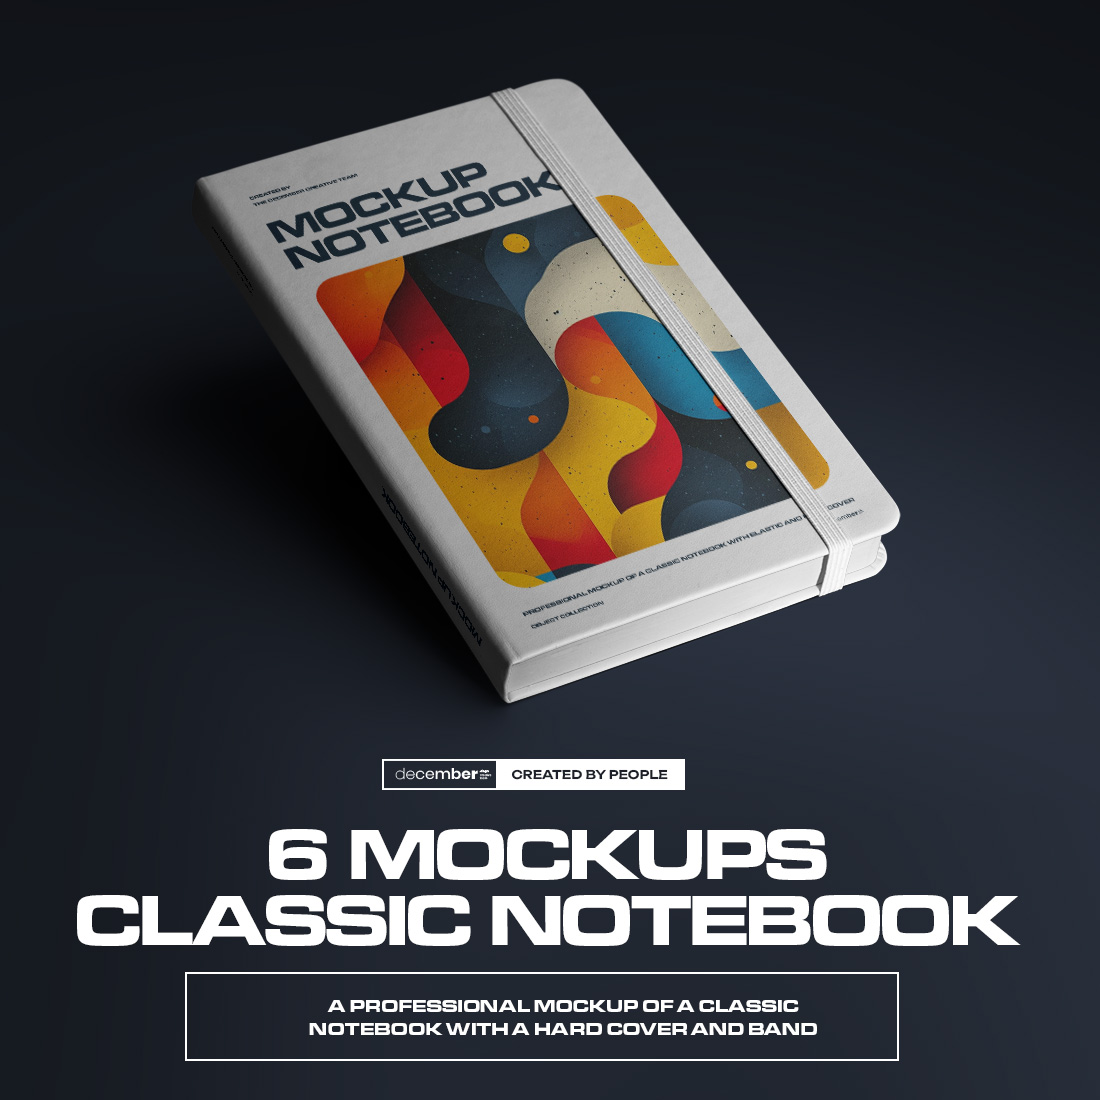 6 Mockups of Classic Notebook with Band and Hard Cover vol2 cover image.